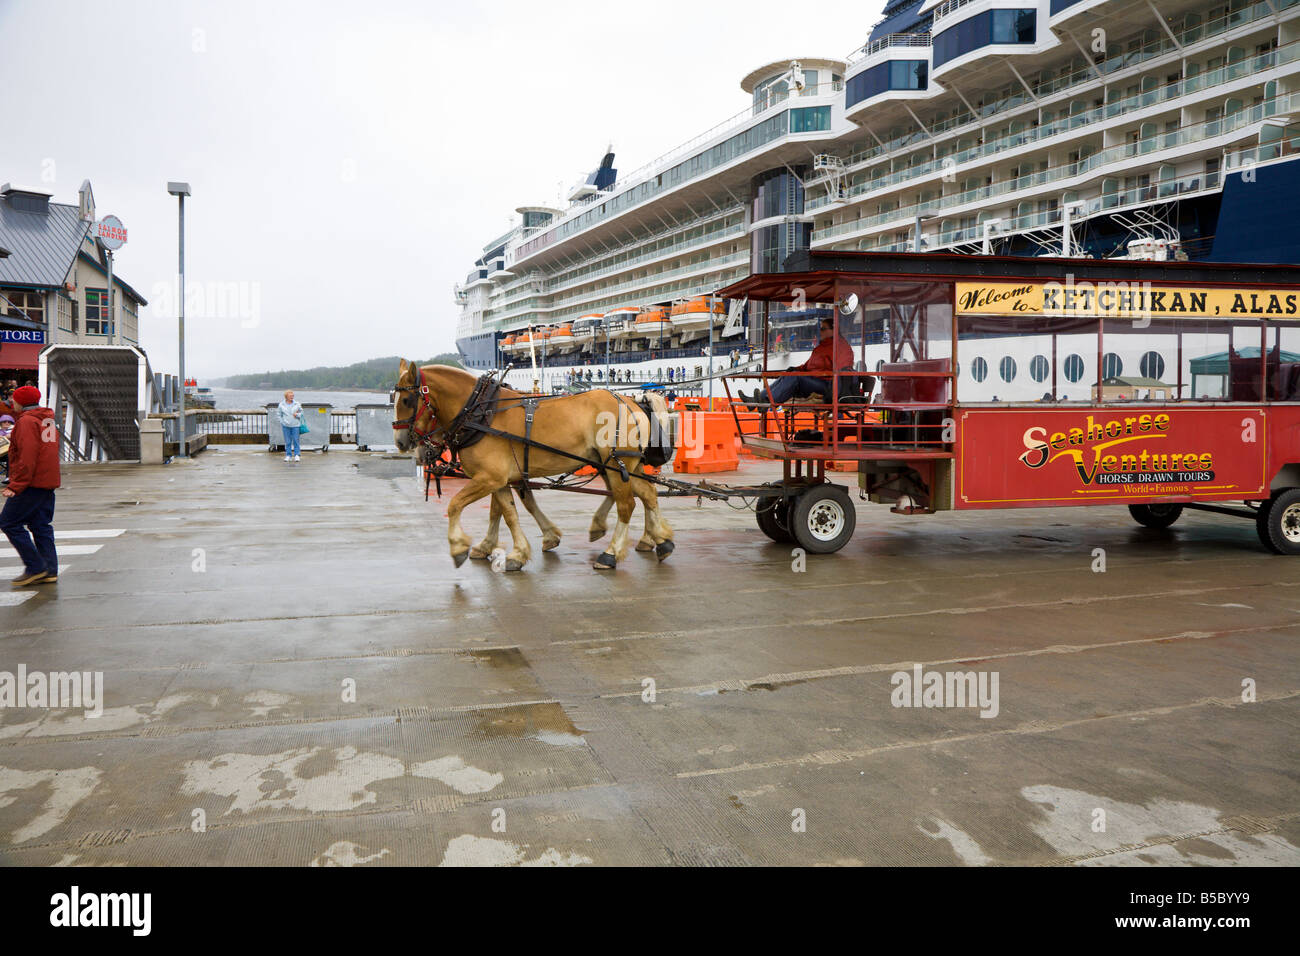 Horse and wagon pulling up to get passengers for tour of Ketchikan Alaska Stock Photo